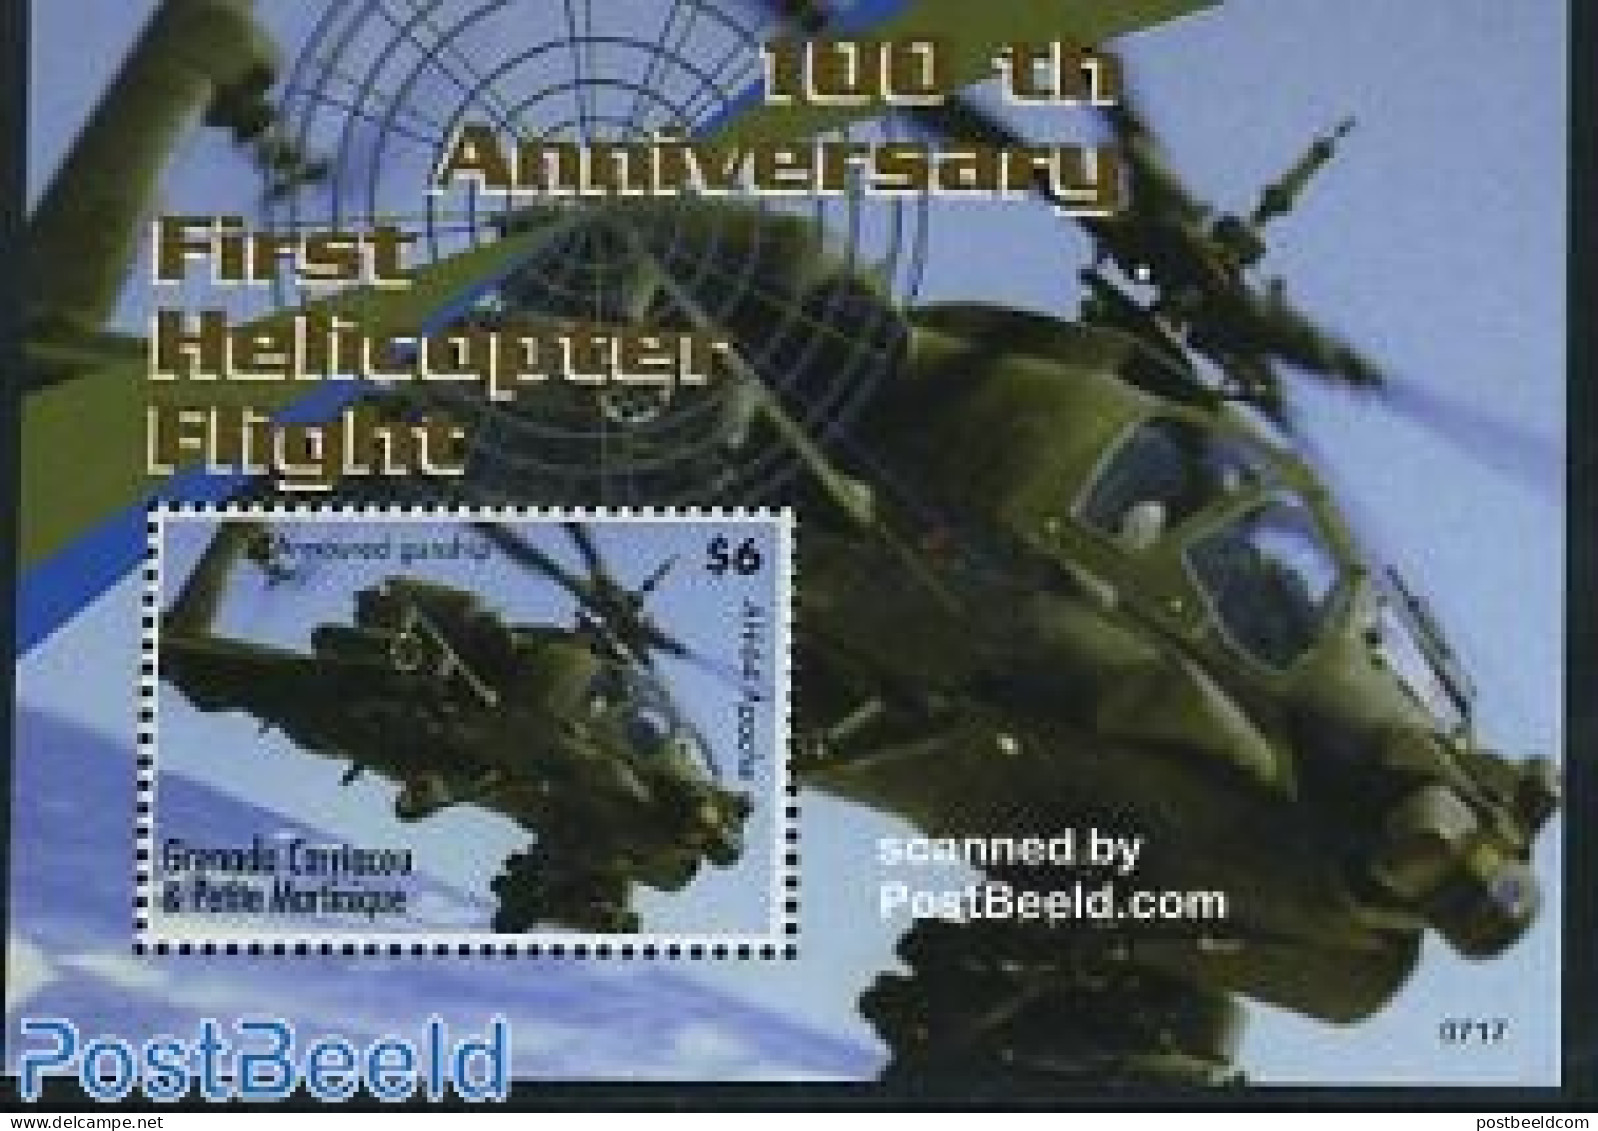 Grenada Grenadines 2007 Helicopters S/s, Mint NH, Transport - Helicopters - Elicotteri